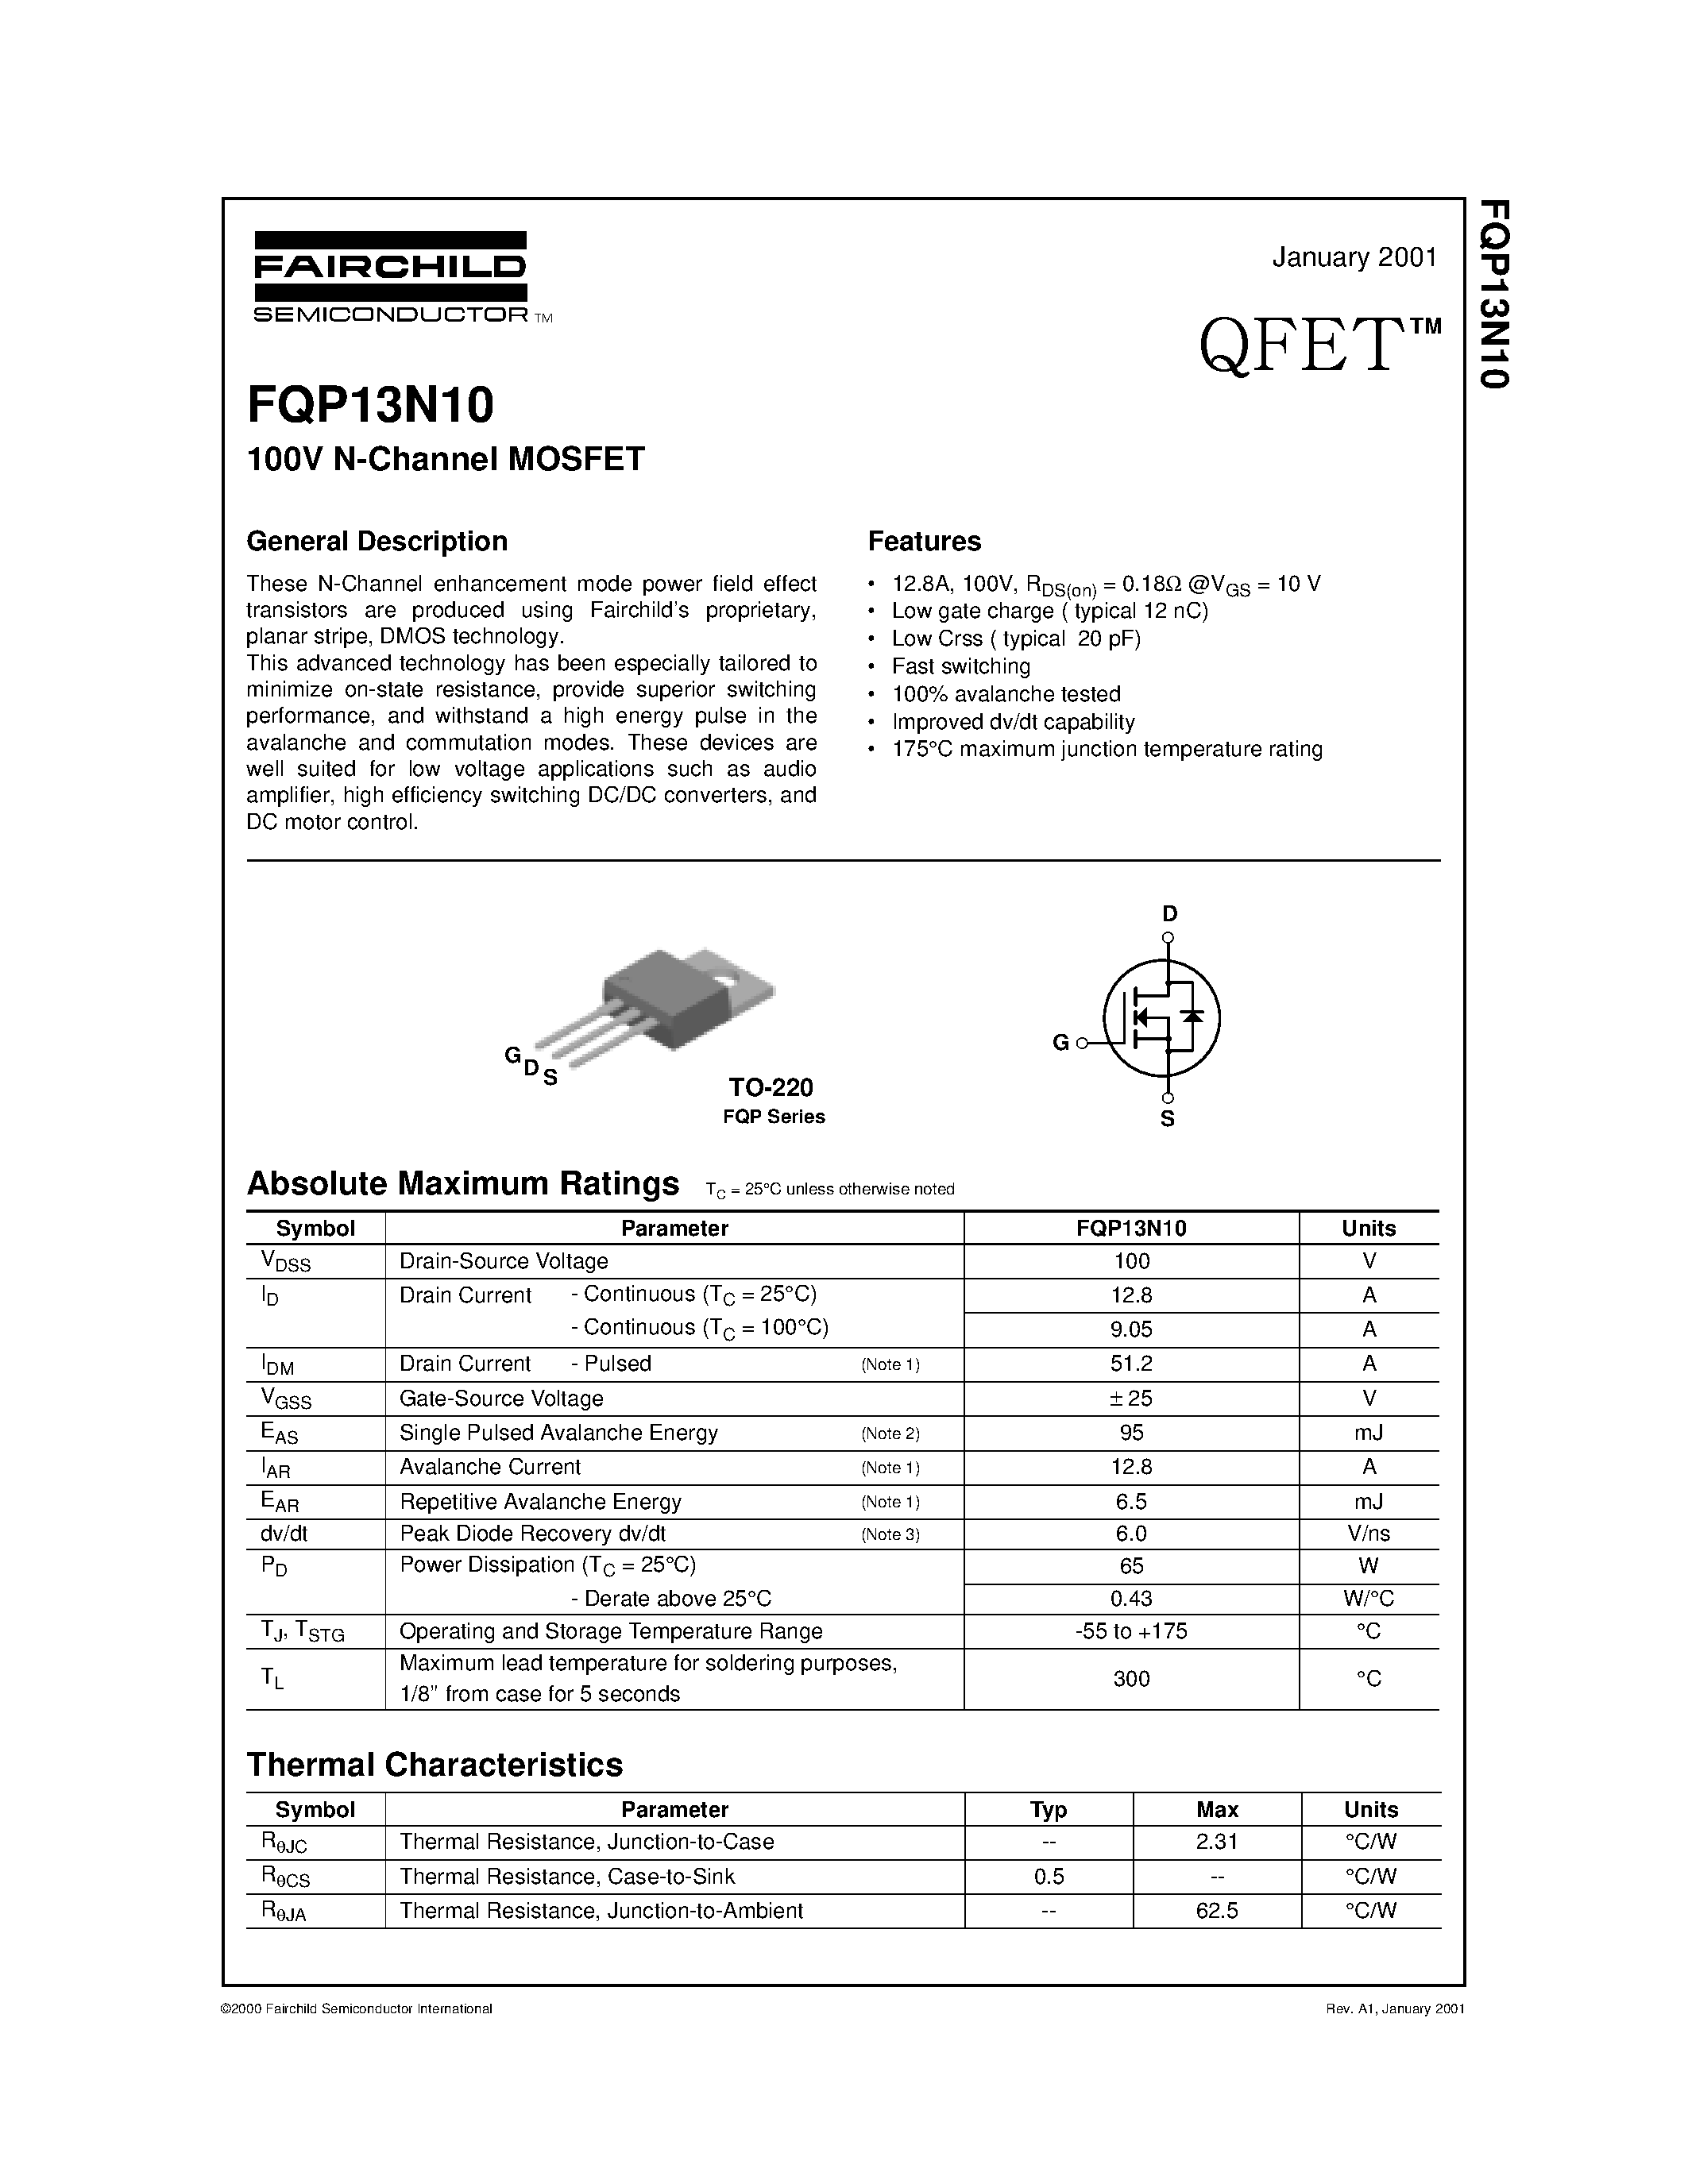 Datasheet FQP13N10 - 100V N-Channel MOSFET page 1